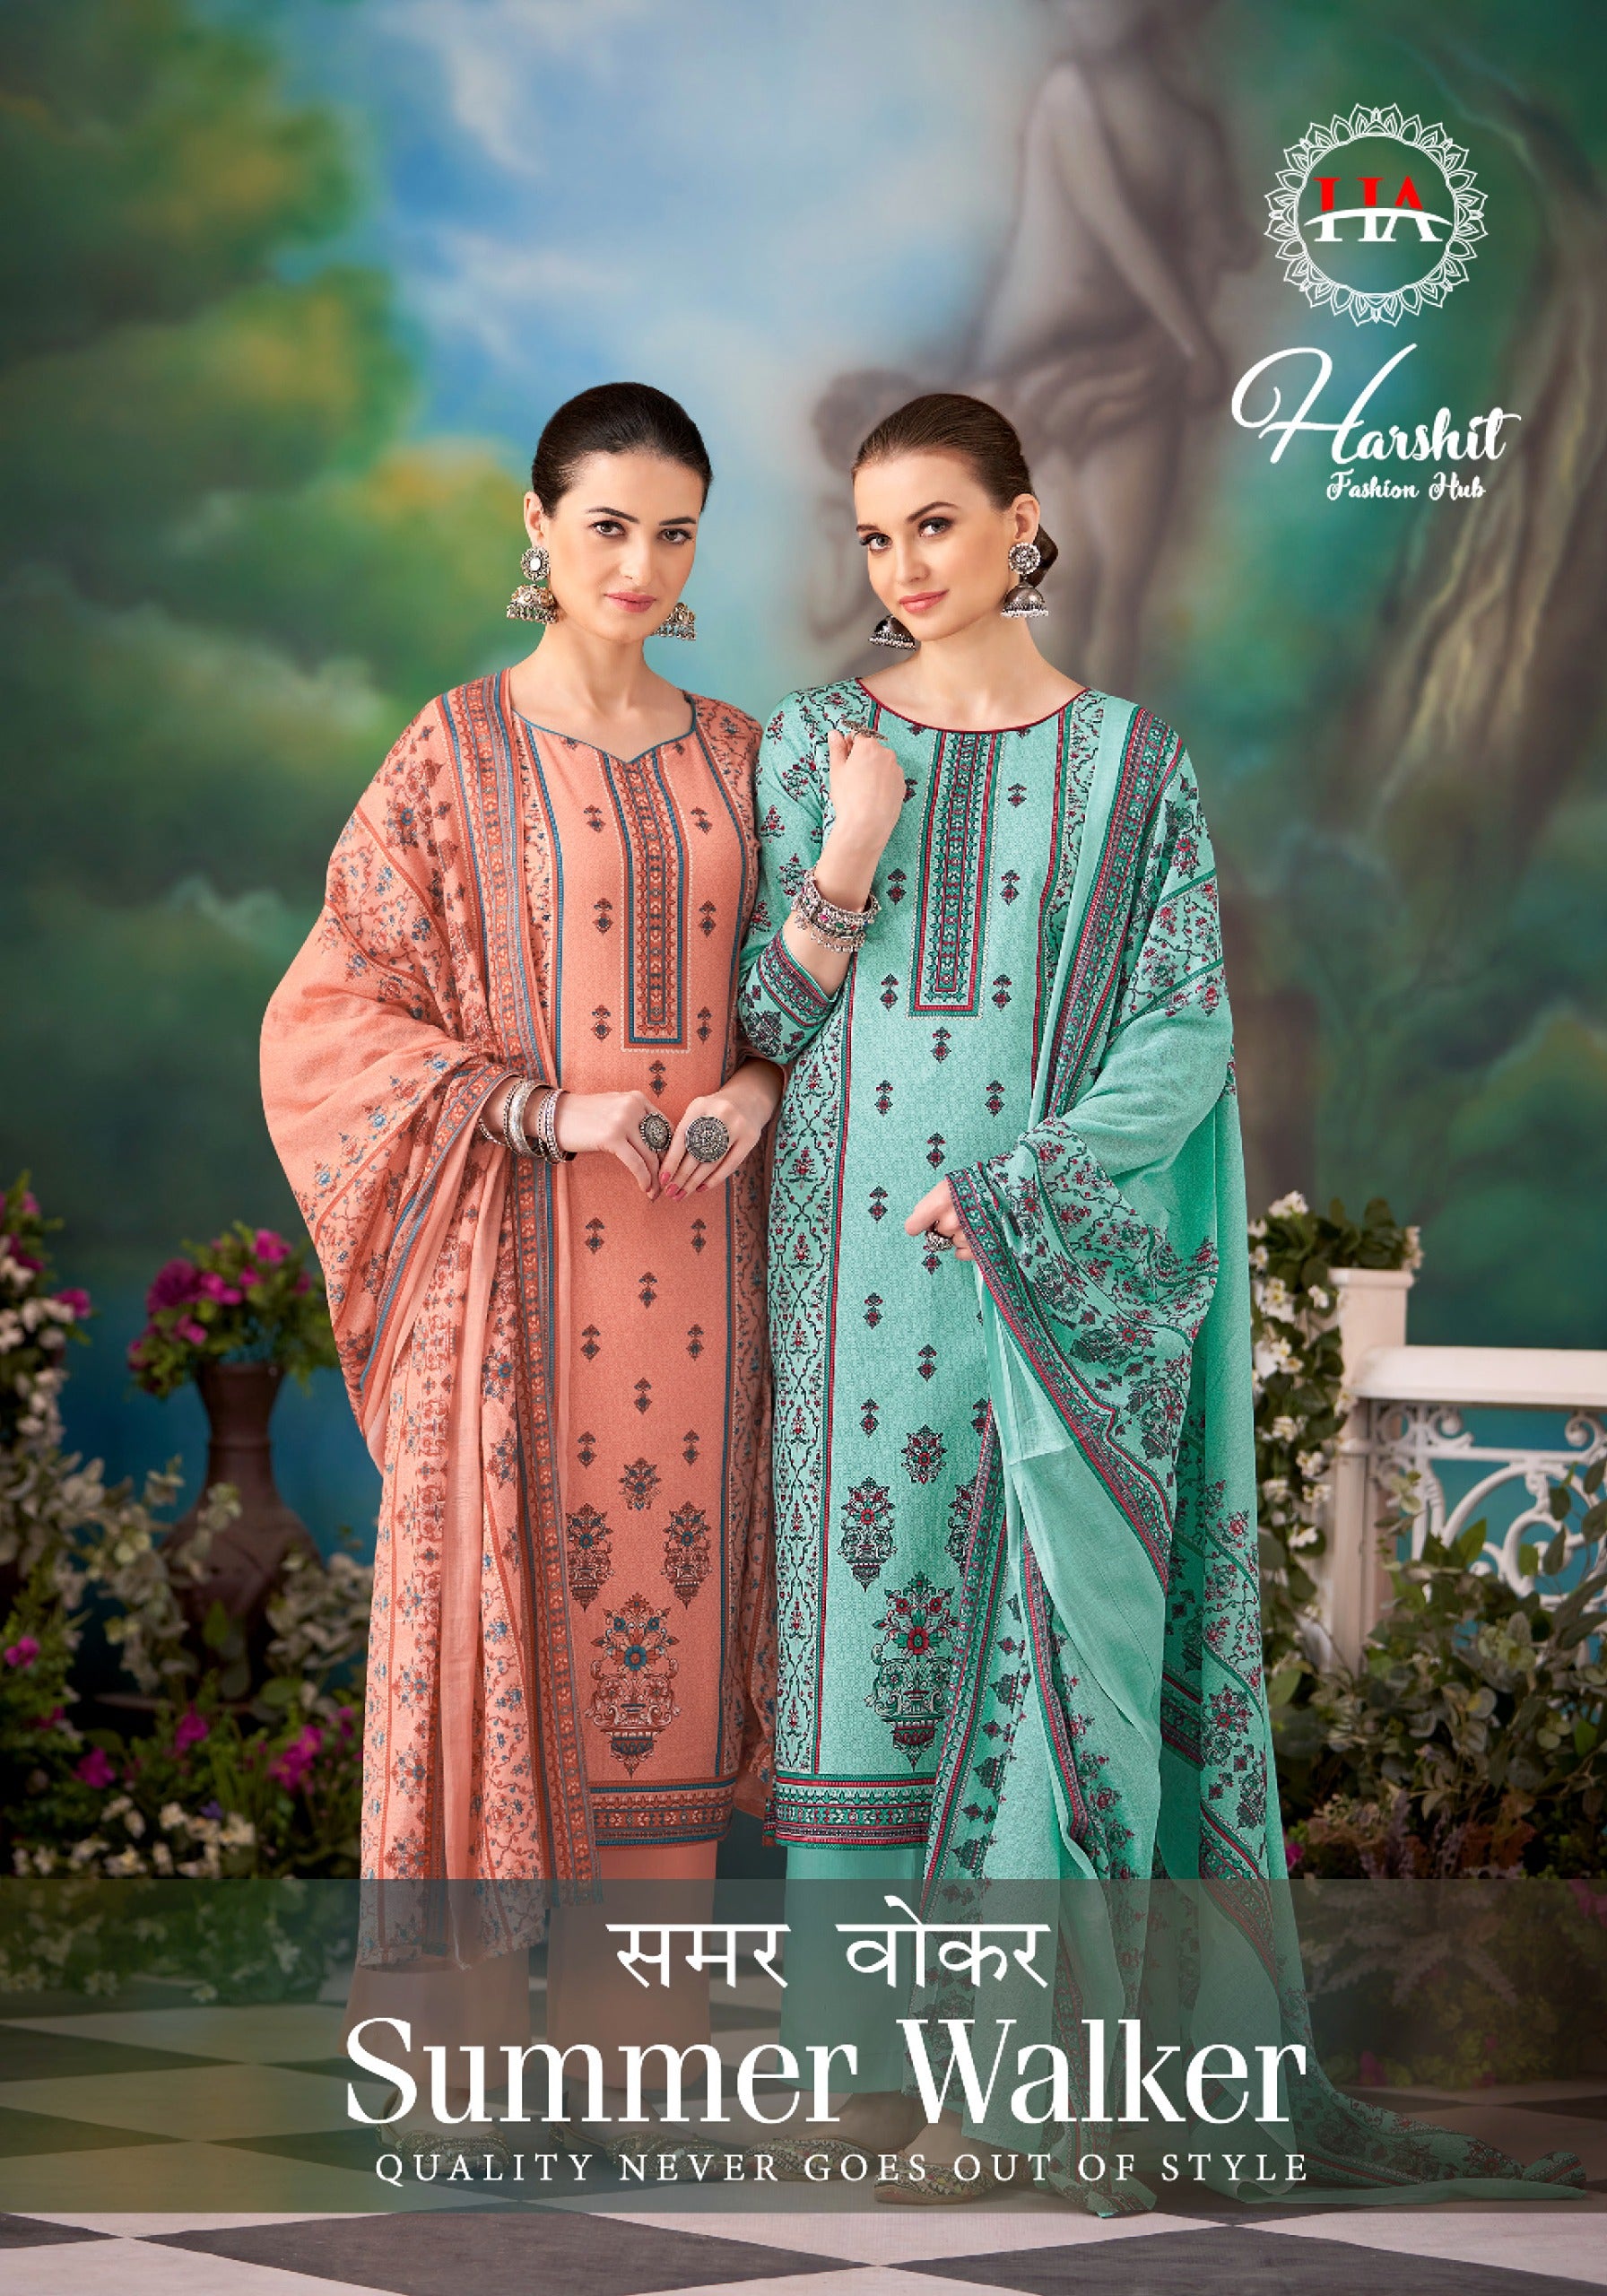 Alok Suit Harshit Fashion Hub Summer Walker Cambric Cotton With Embroidery Work Salwar Suit Embroidred Suit Wholesaler